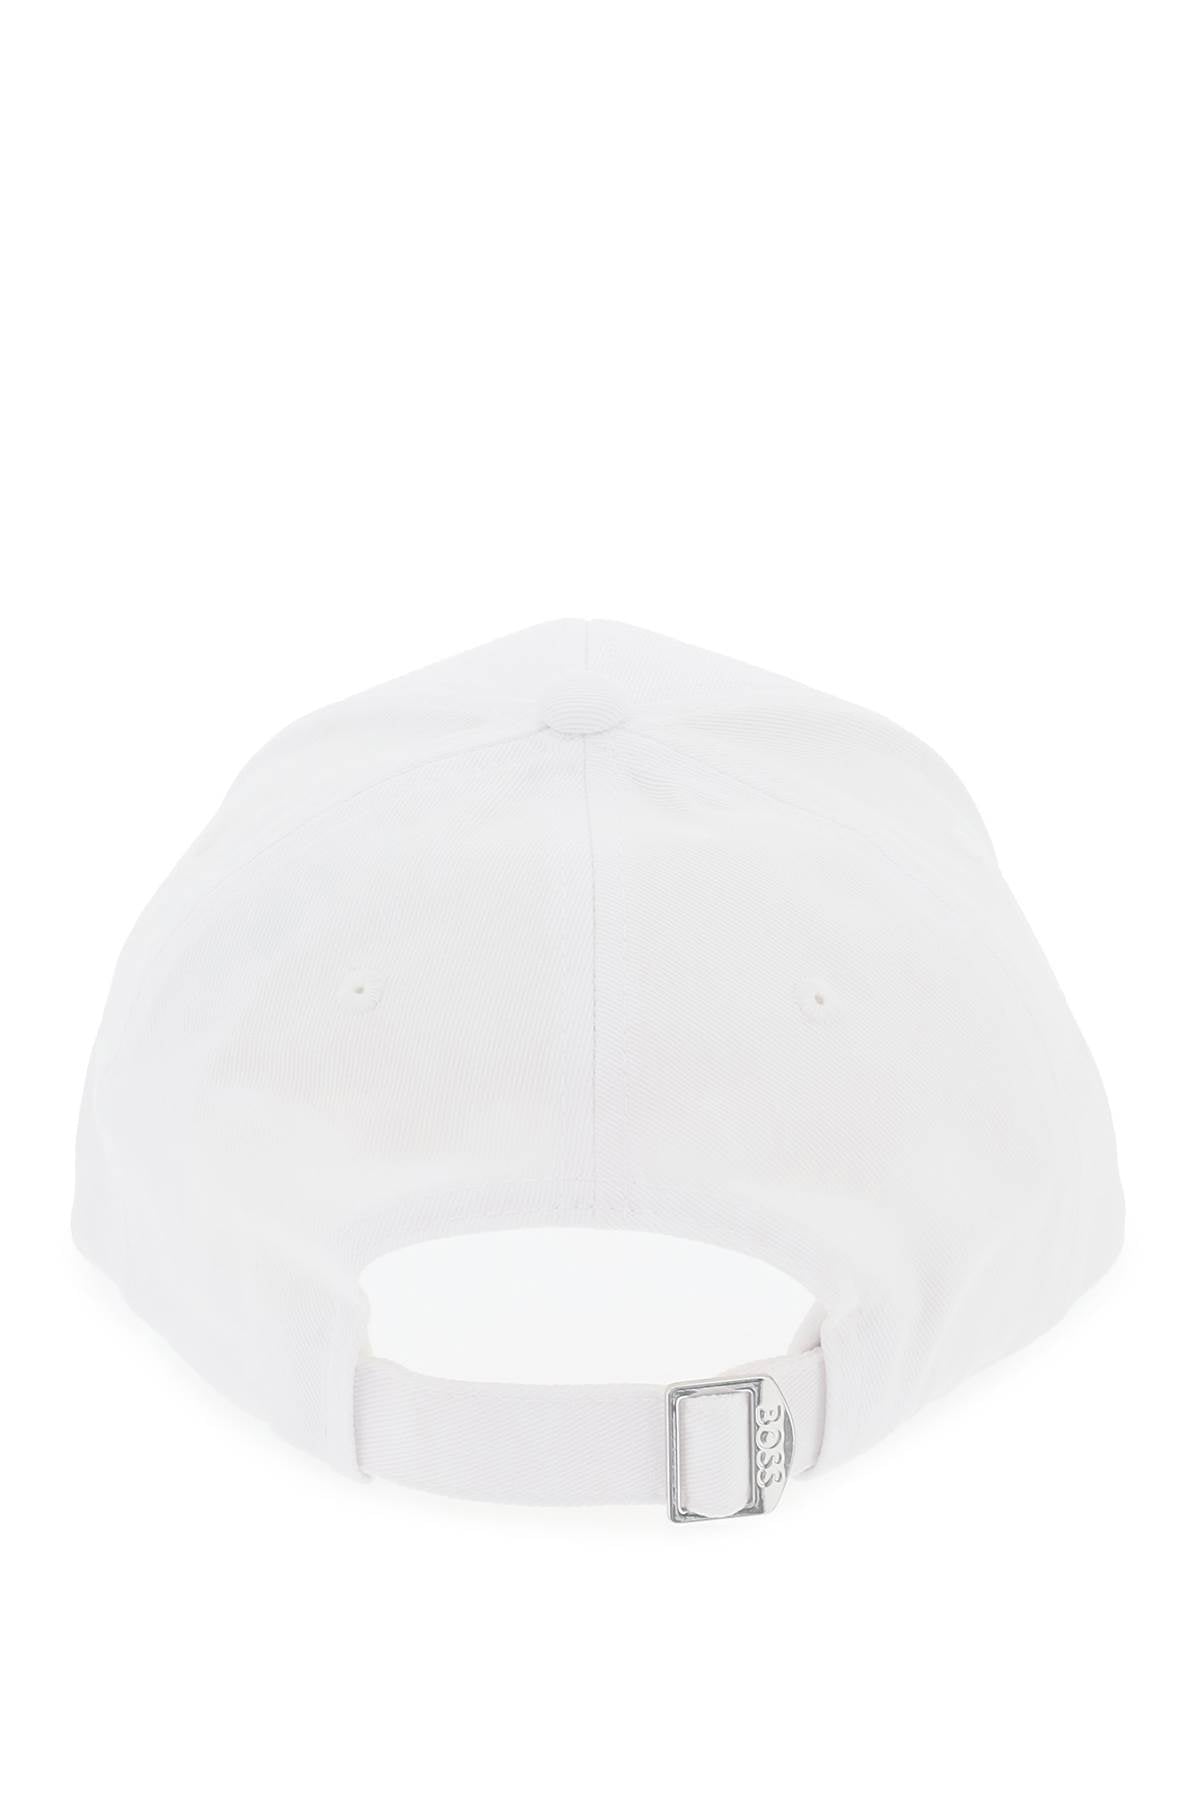 Boss Baseball Cap With Embroidered Logo   White